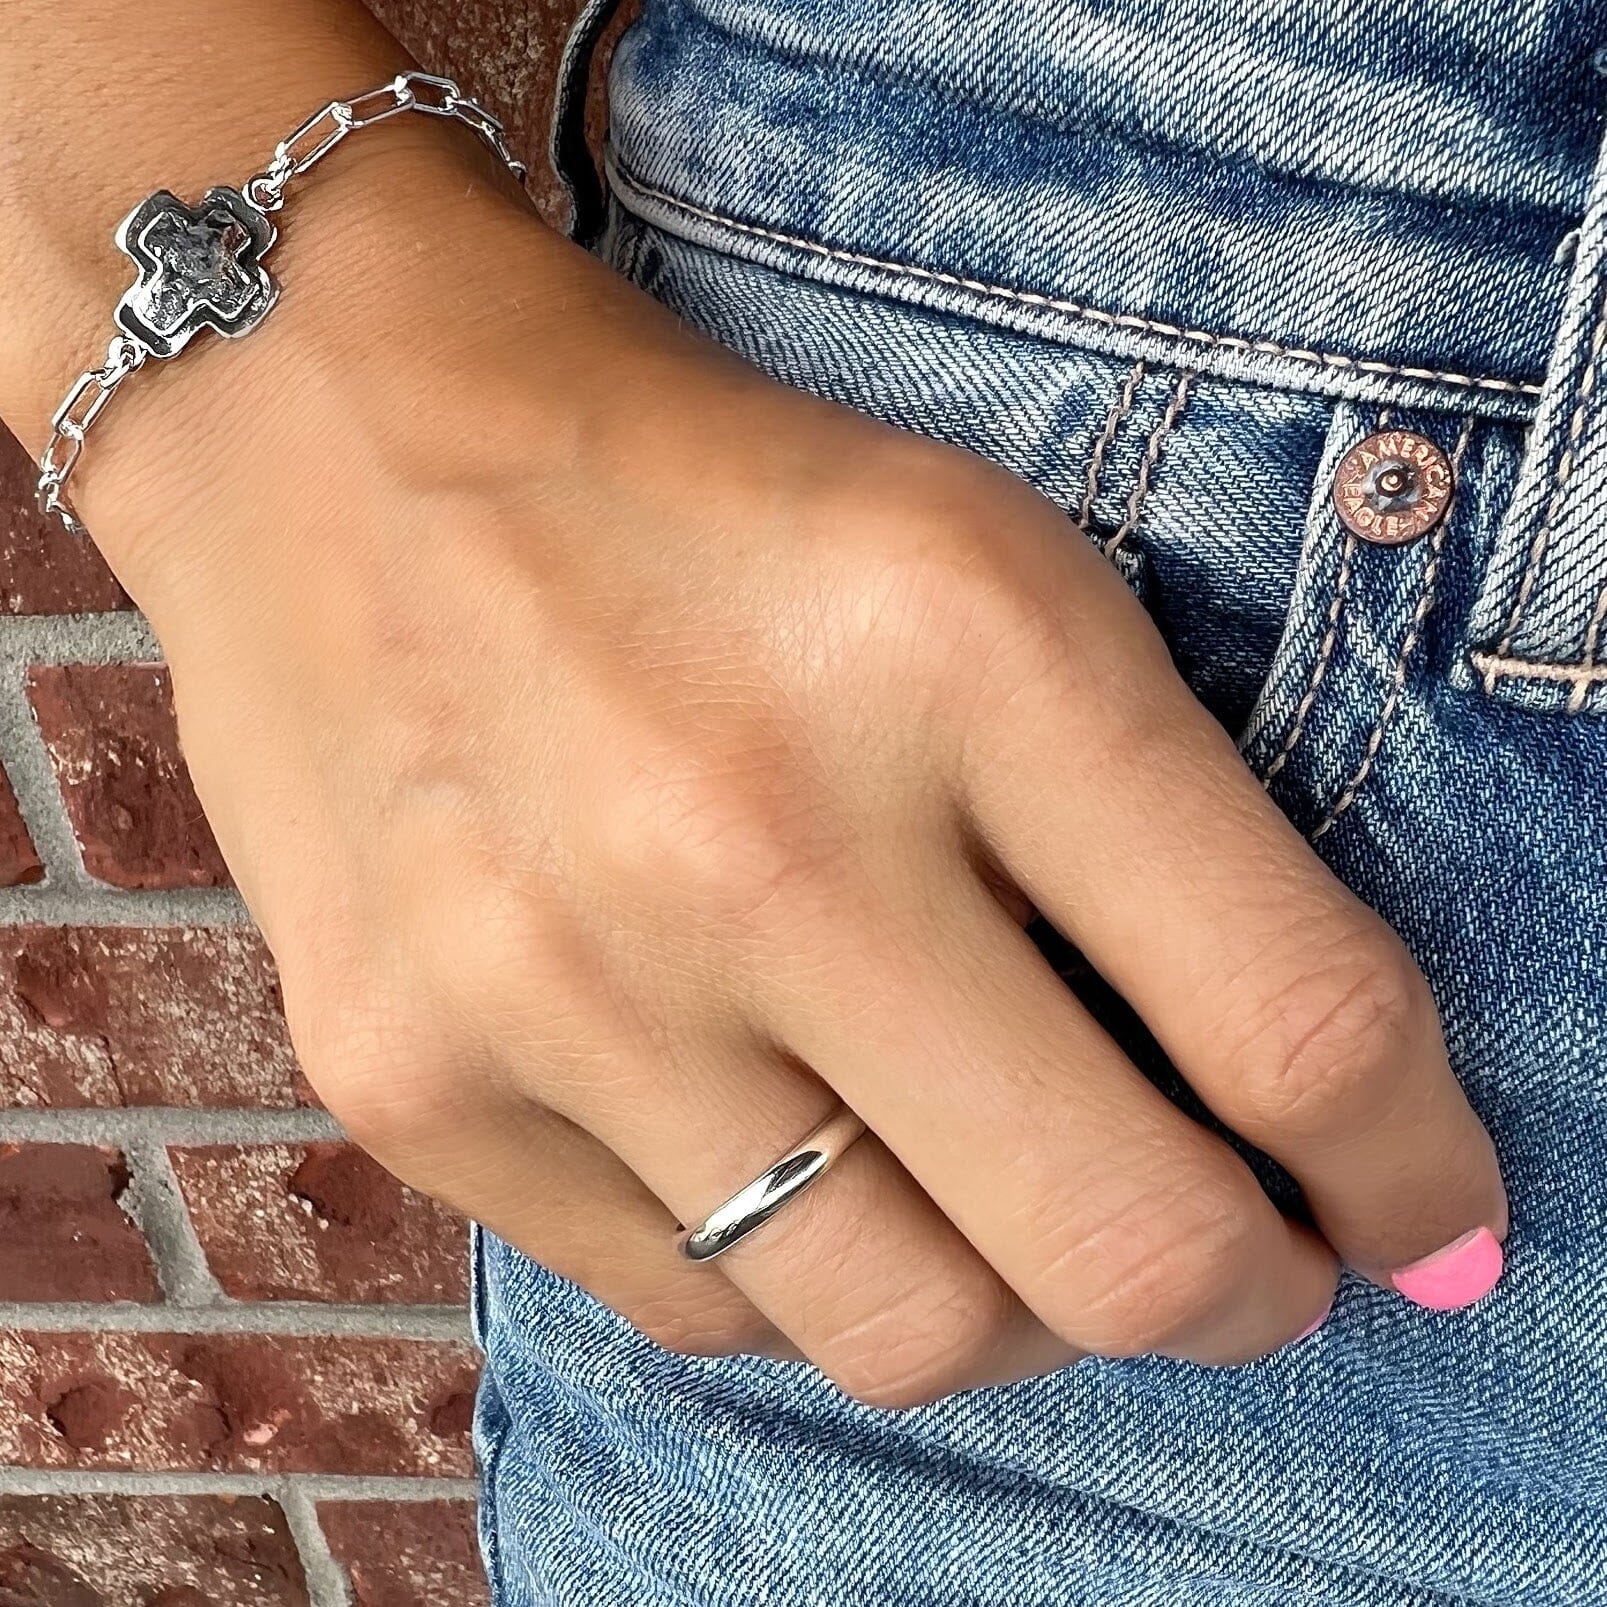 Plain Jane Ring paired with dainty paperclip cross bracelet